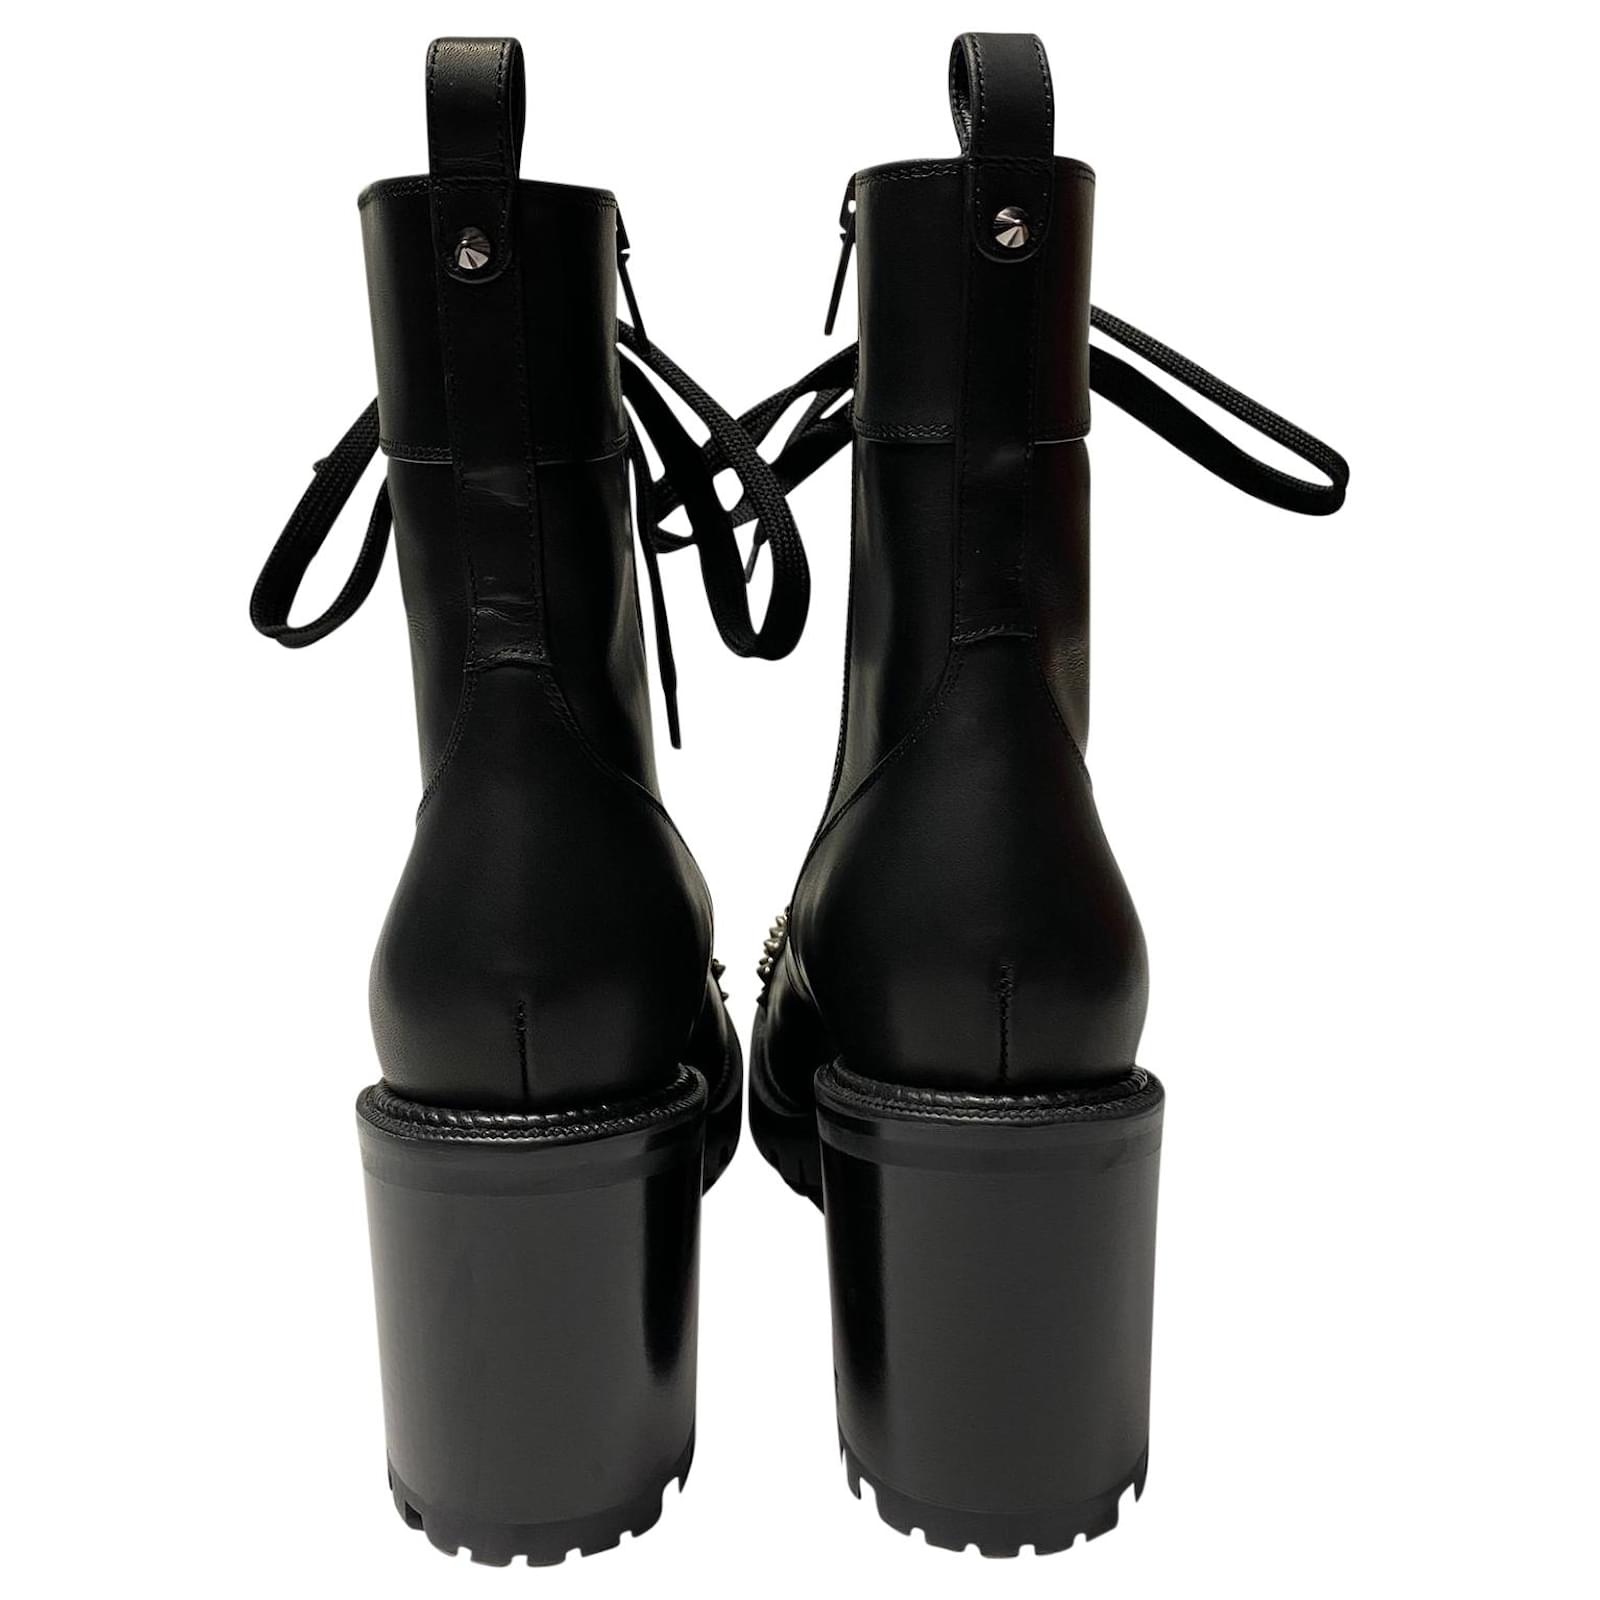 Christian Louboutin TS Croc 70 Spiked Ankle Boots in Black calf